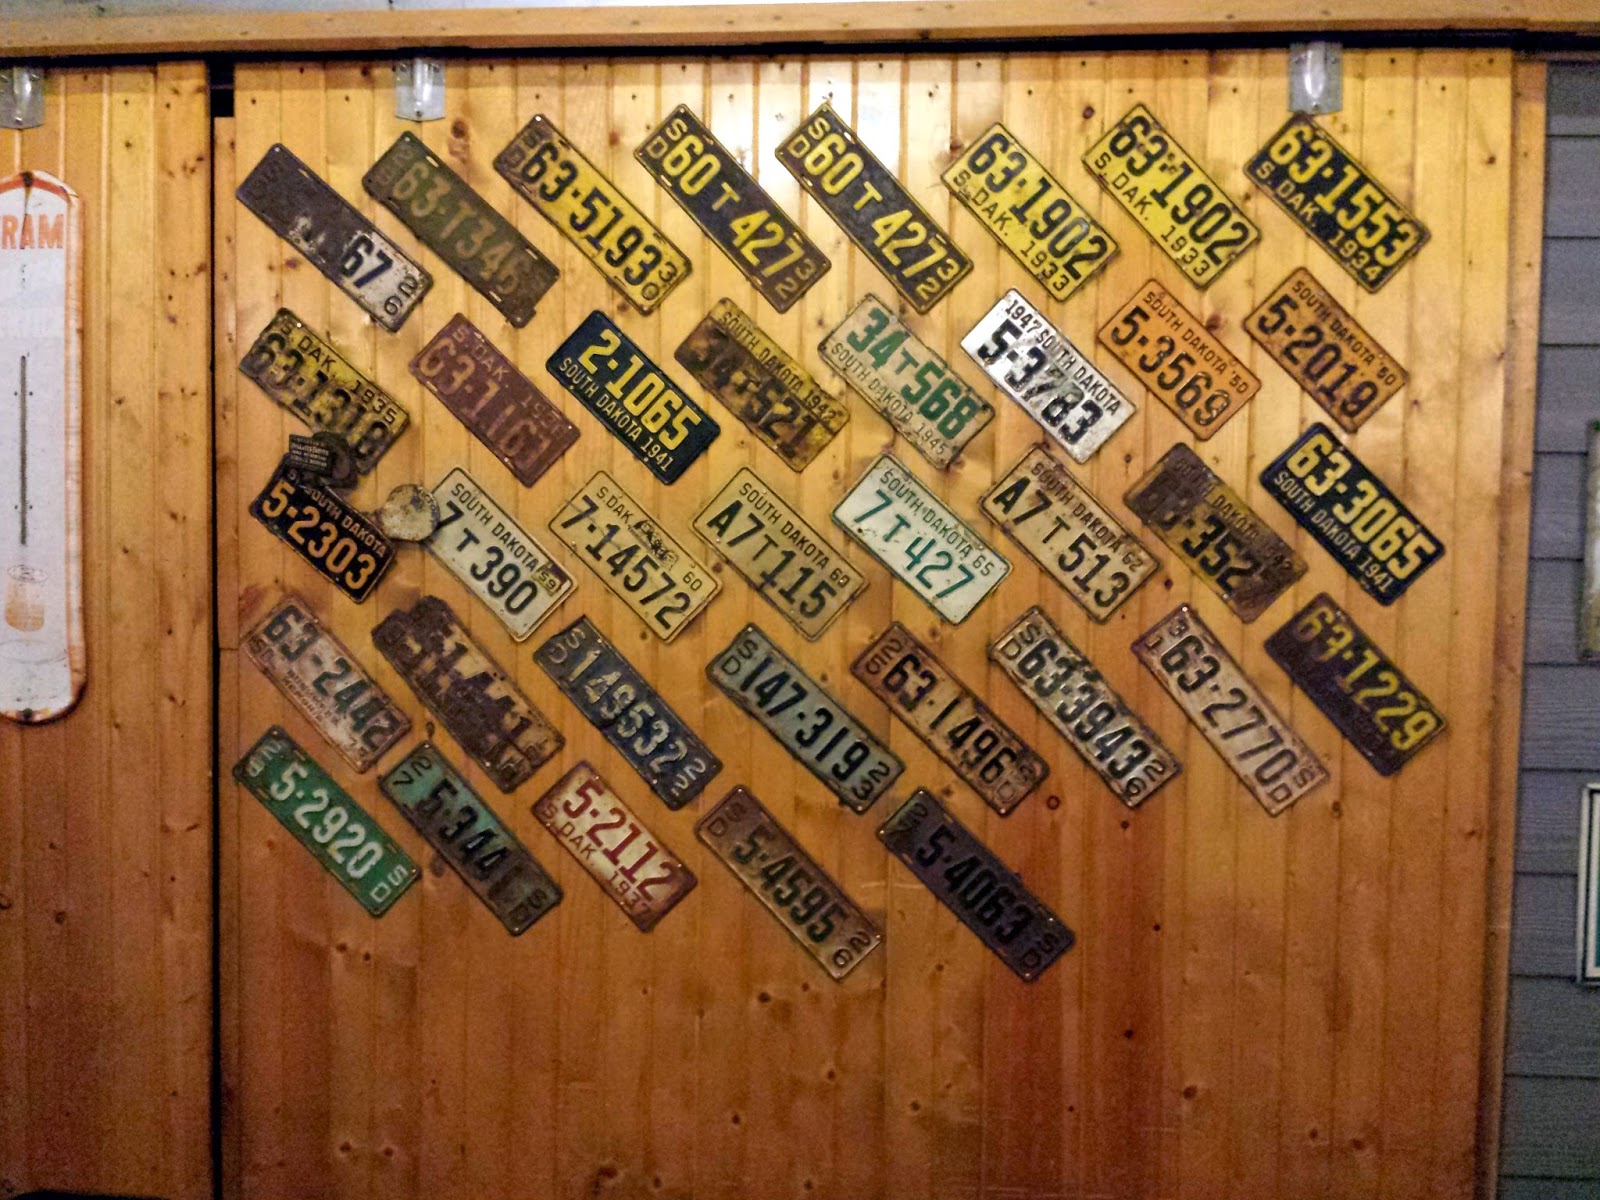 15 Cool Things That You Can Make With Old License Plates - Page 2 of 2